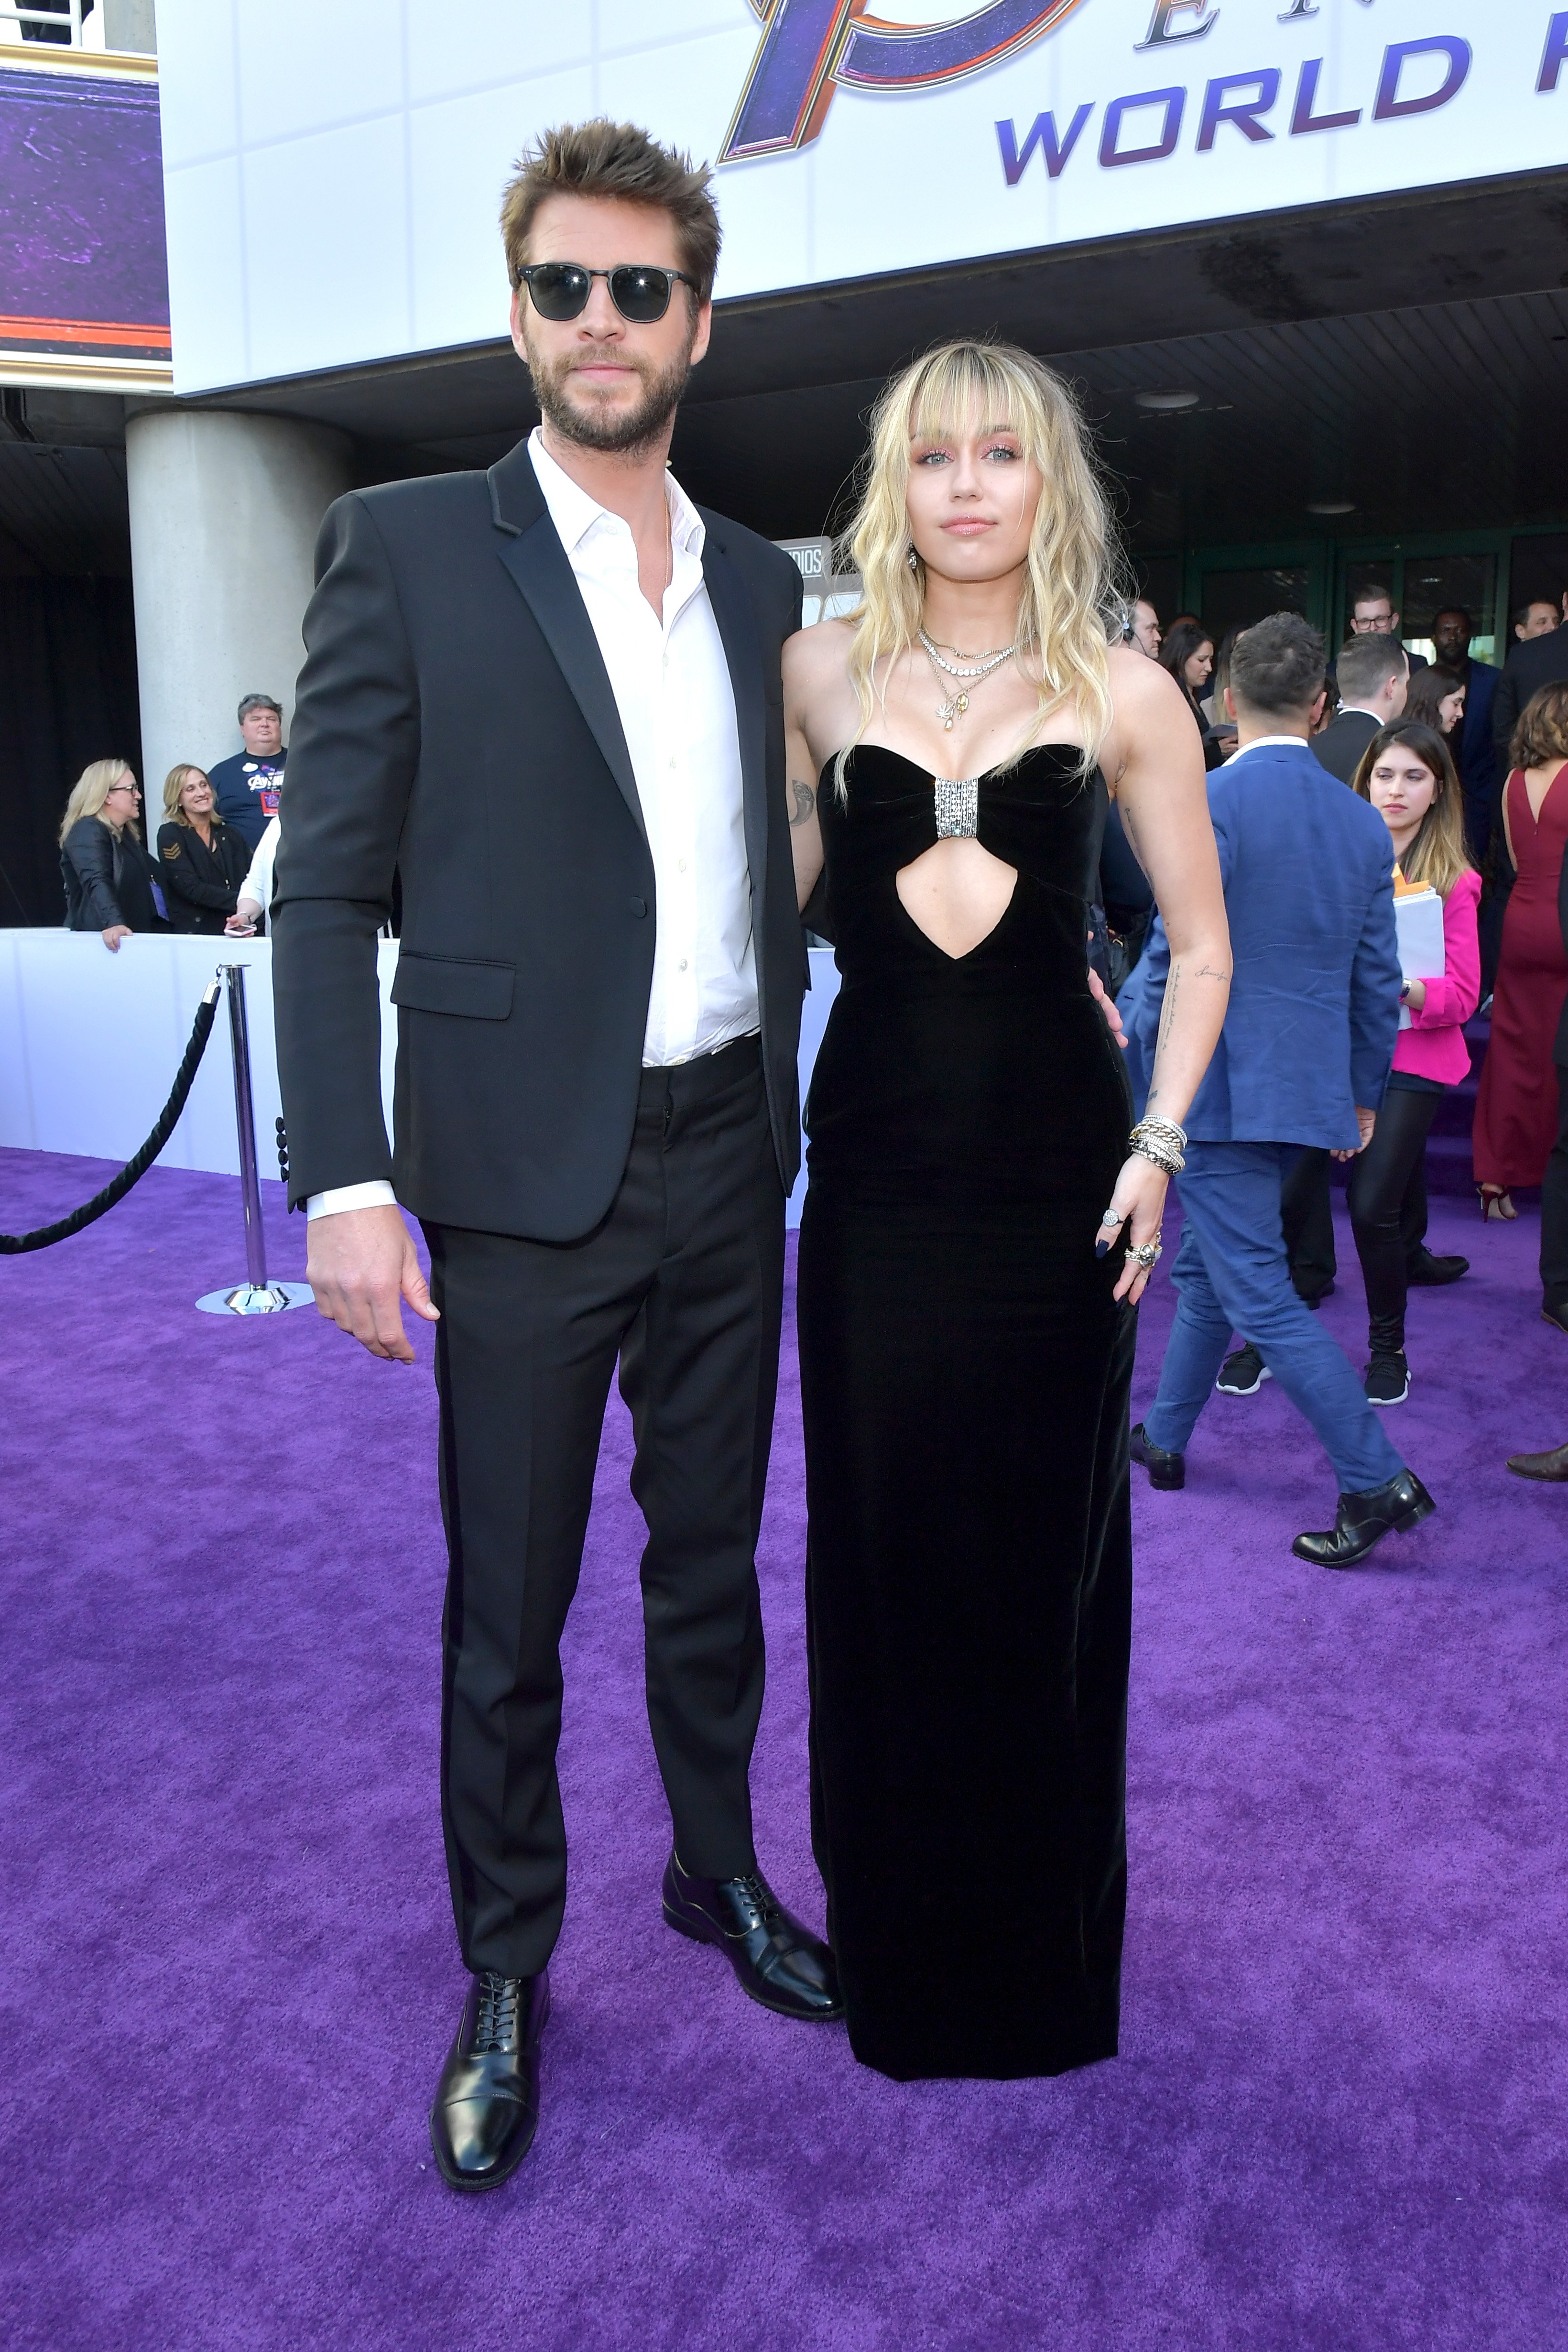 Liam Hemsworth and Miley Cyrus at the world premiere of 'Avengers: Endgame' on April 22, 2019. | Photo: GettyImages